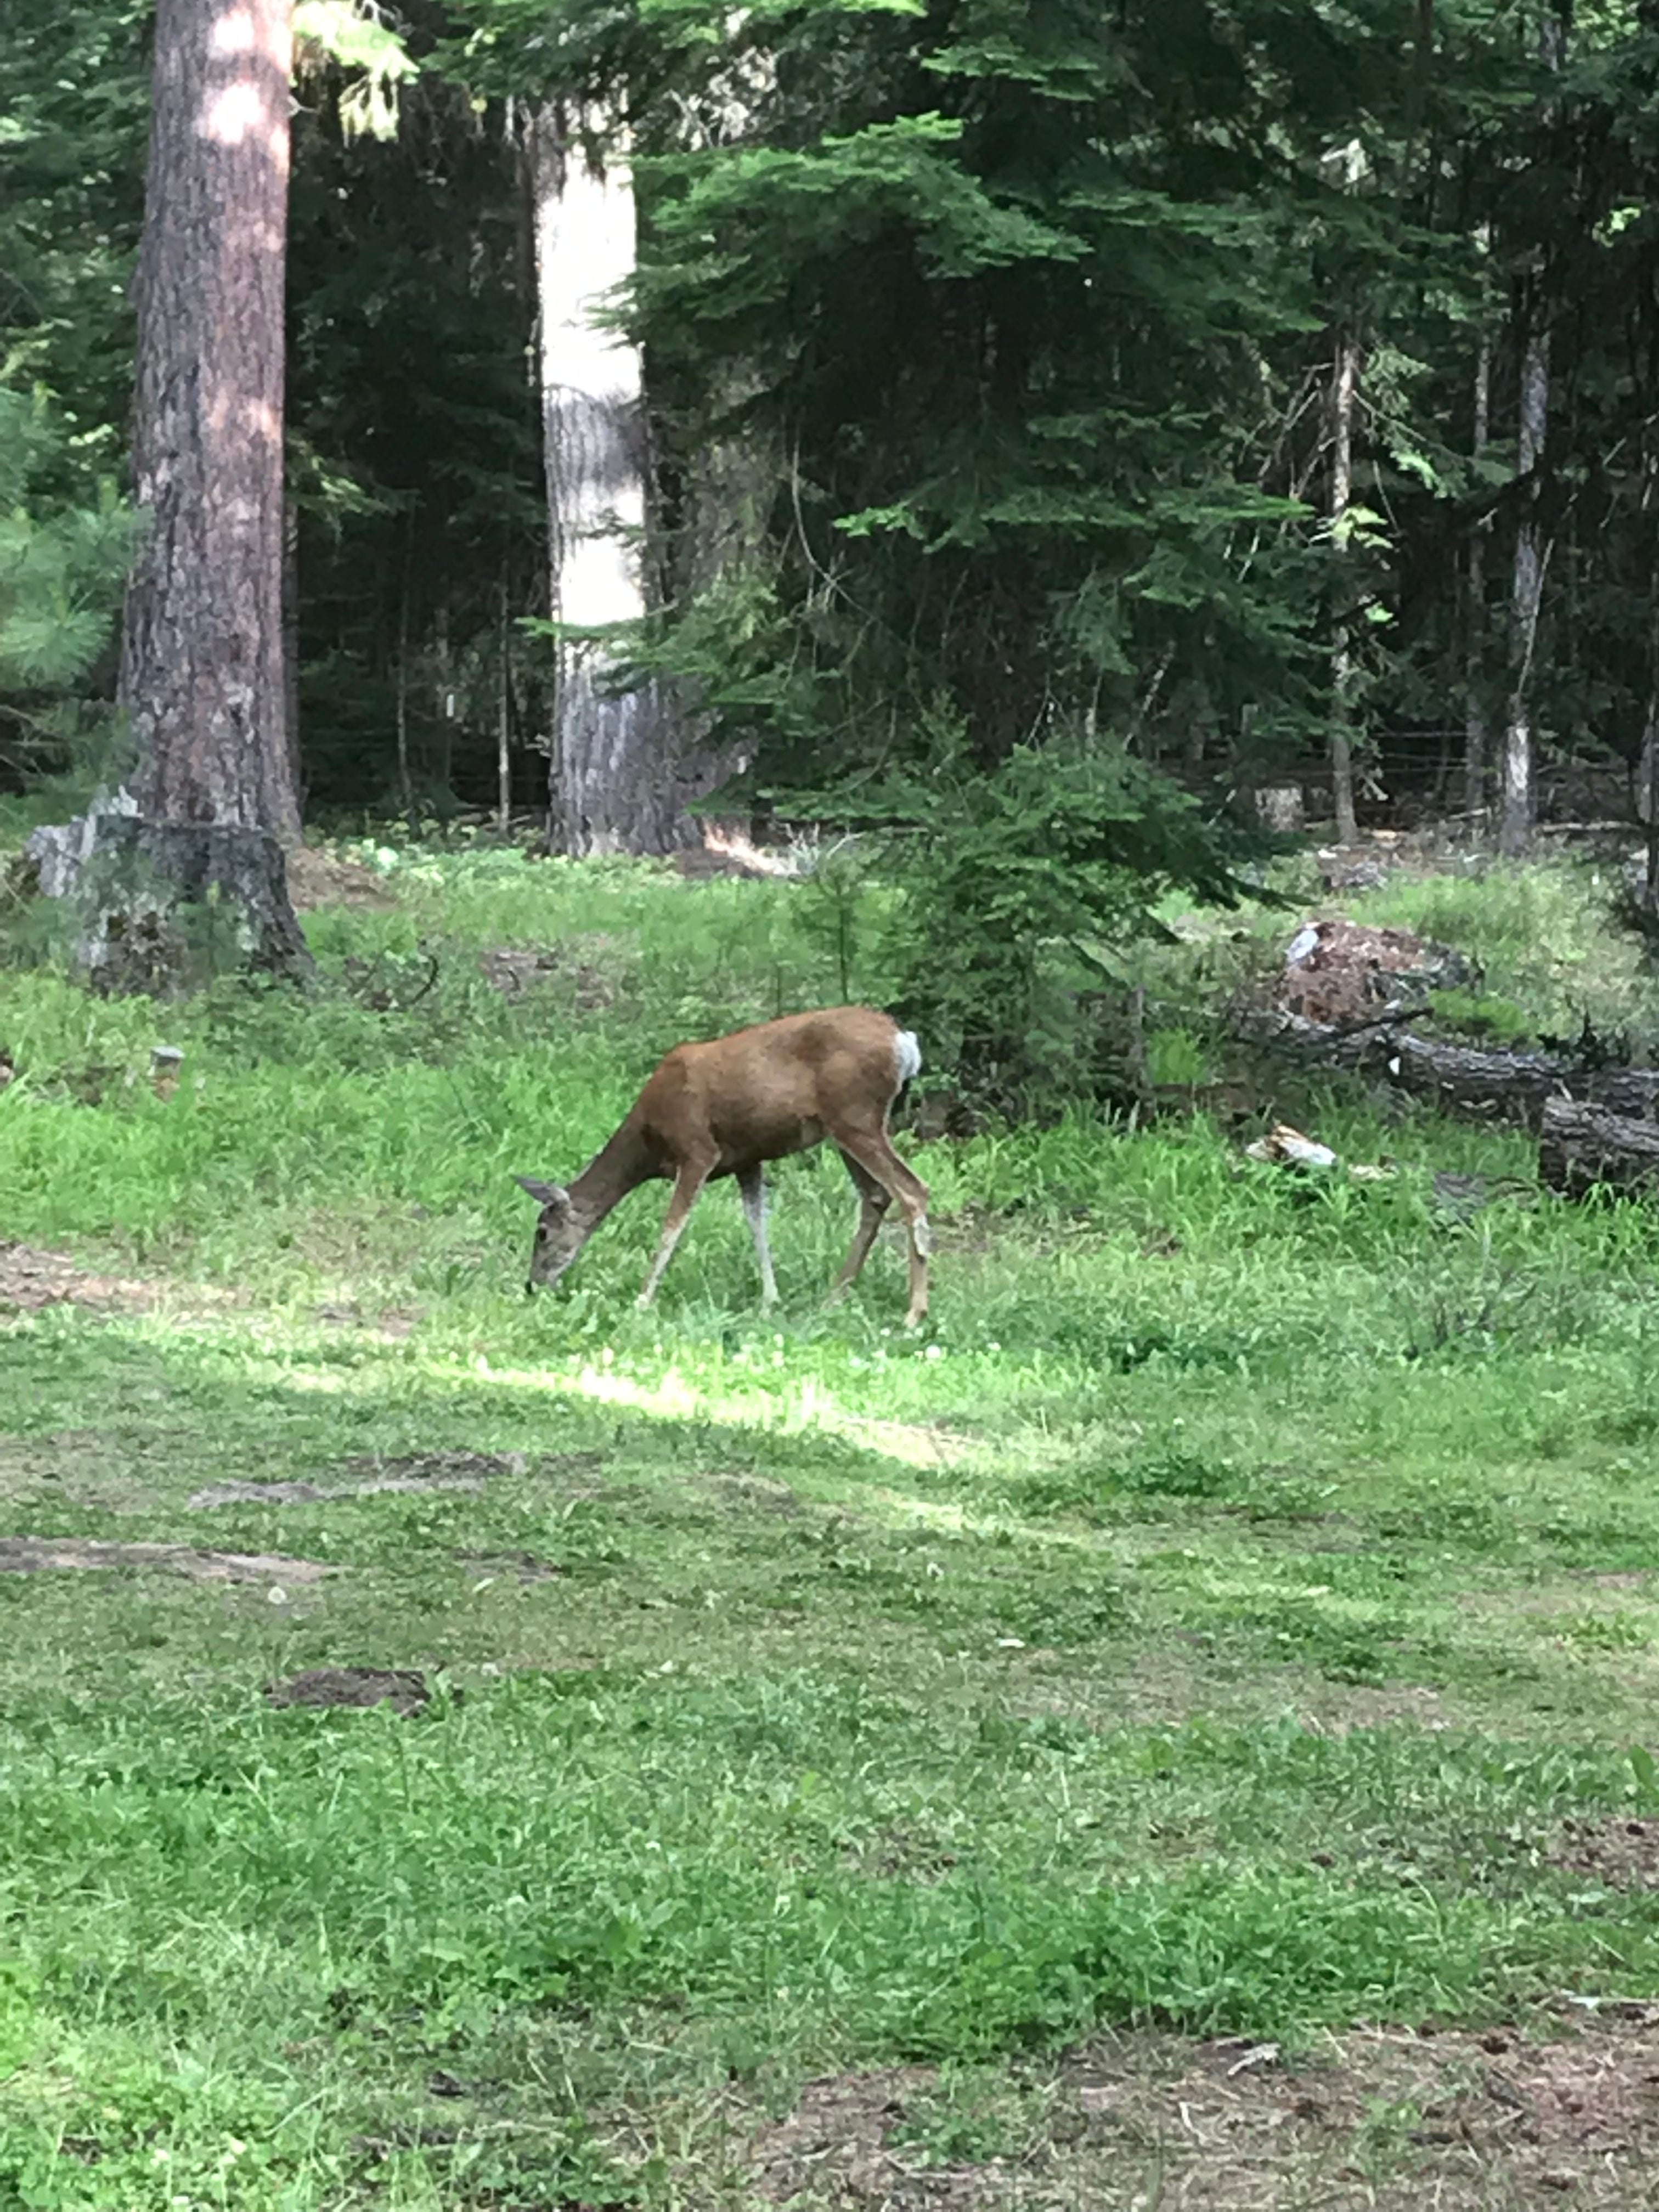 Deer were walking right through our campsite and didn’t seem very afraid of humans.